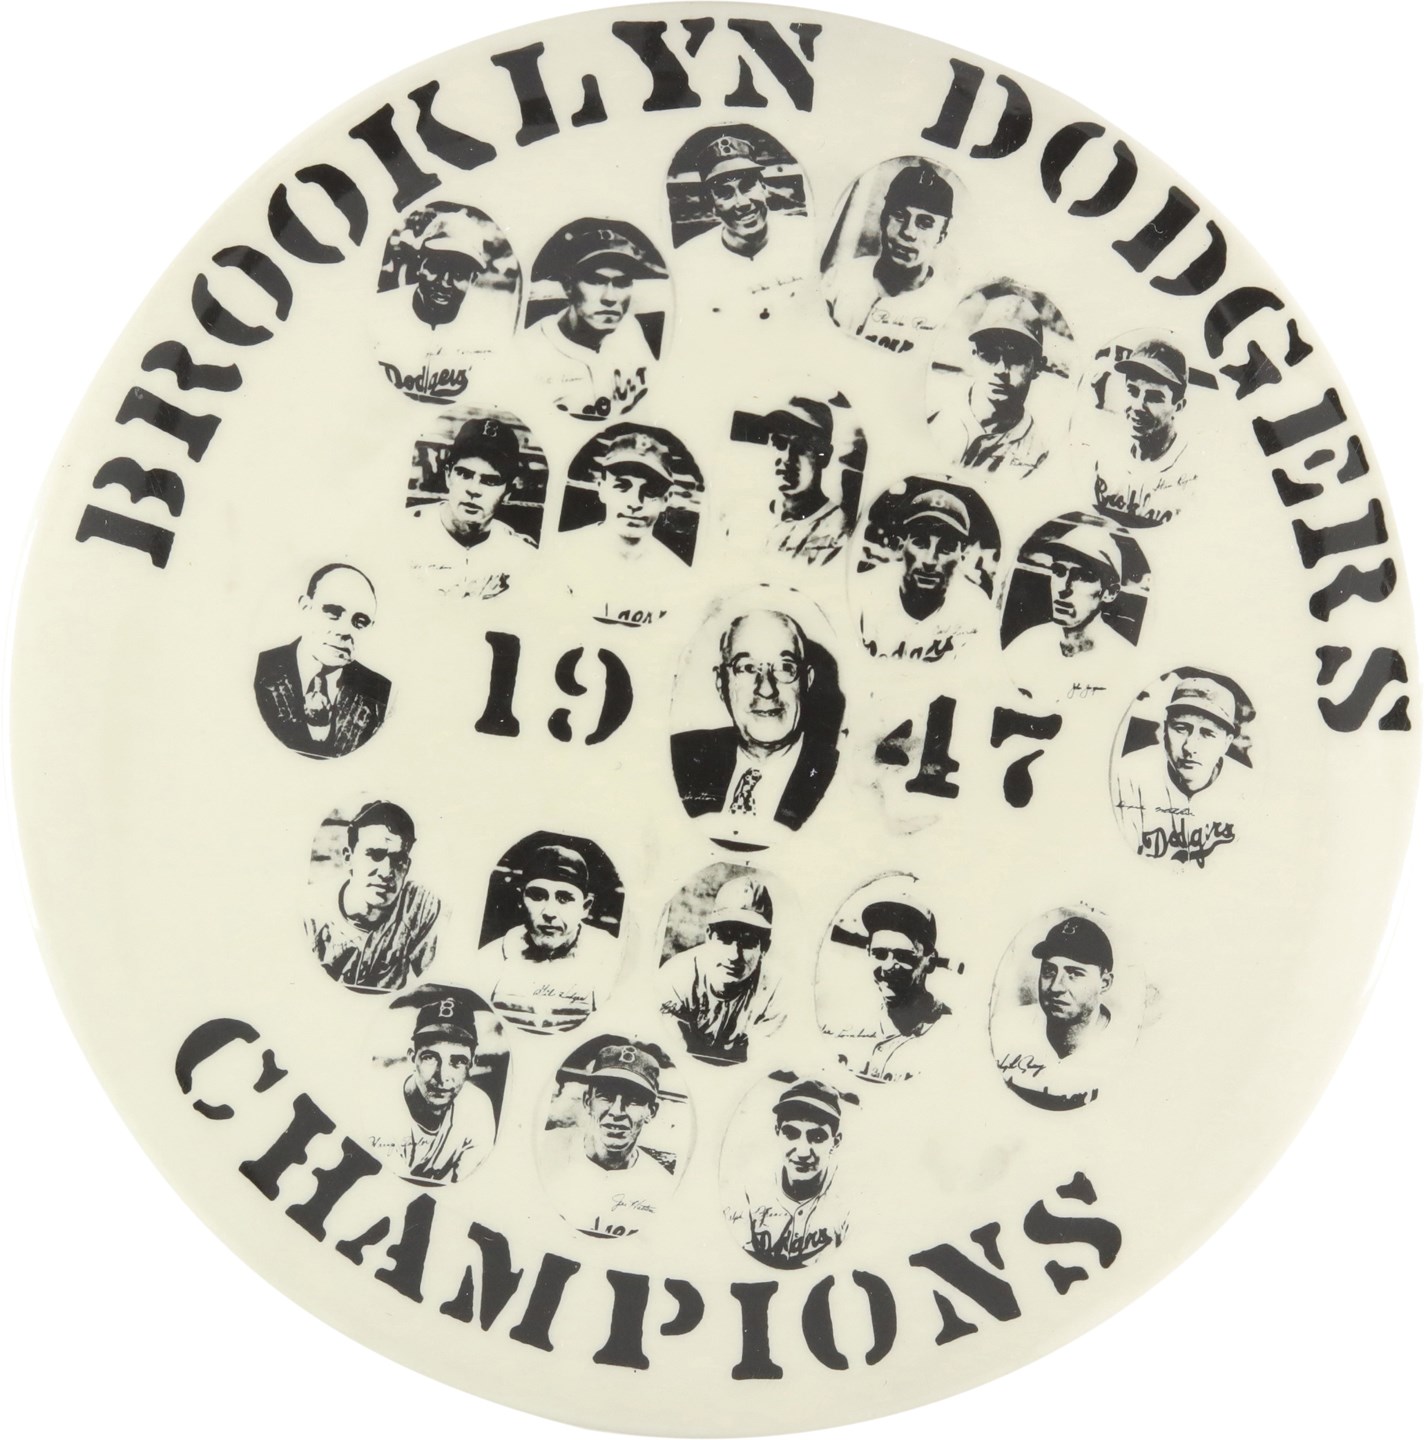 - Rare 1947 Brooklyn Dodgers Large Format Team Composite "Champions" Pin w/Jackie Robinson Rookie